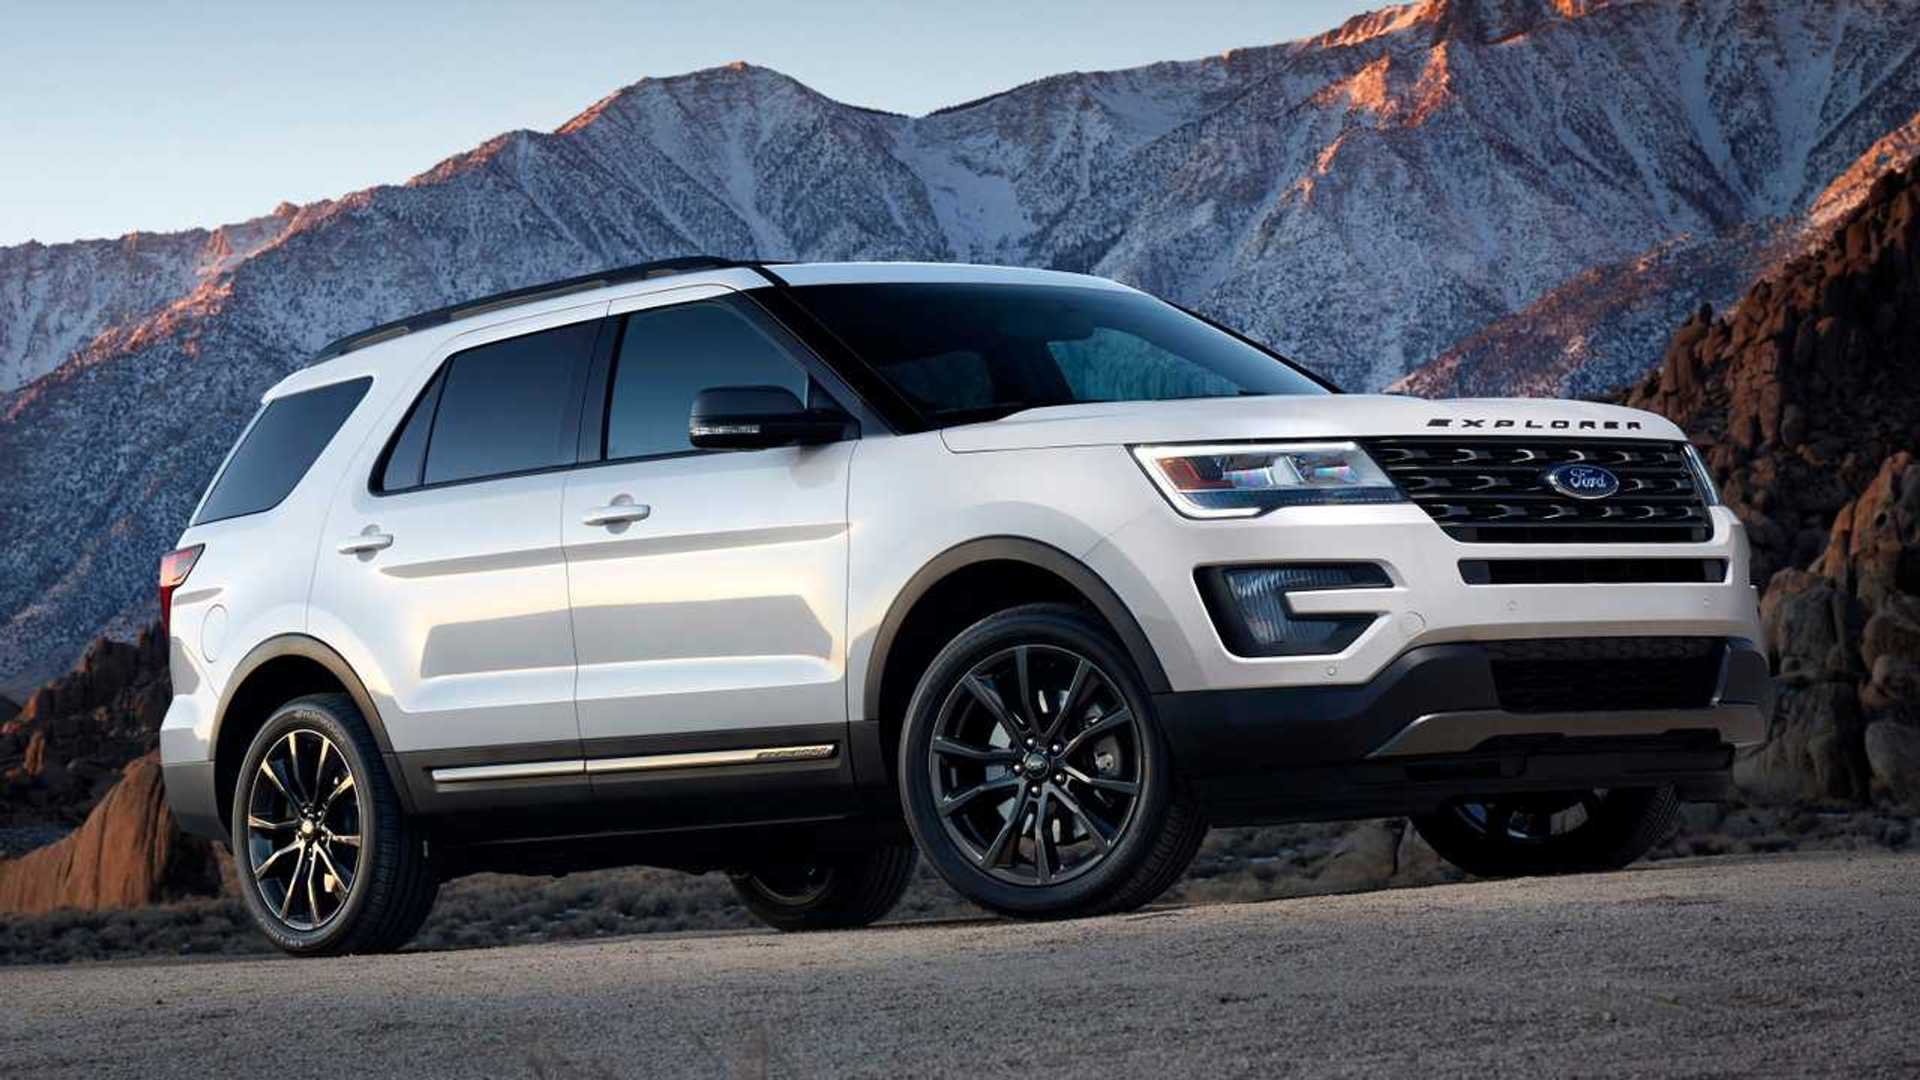 2019 Ford Explorer With $3,000 Discount Might Tempt You